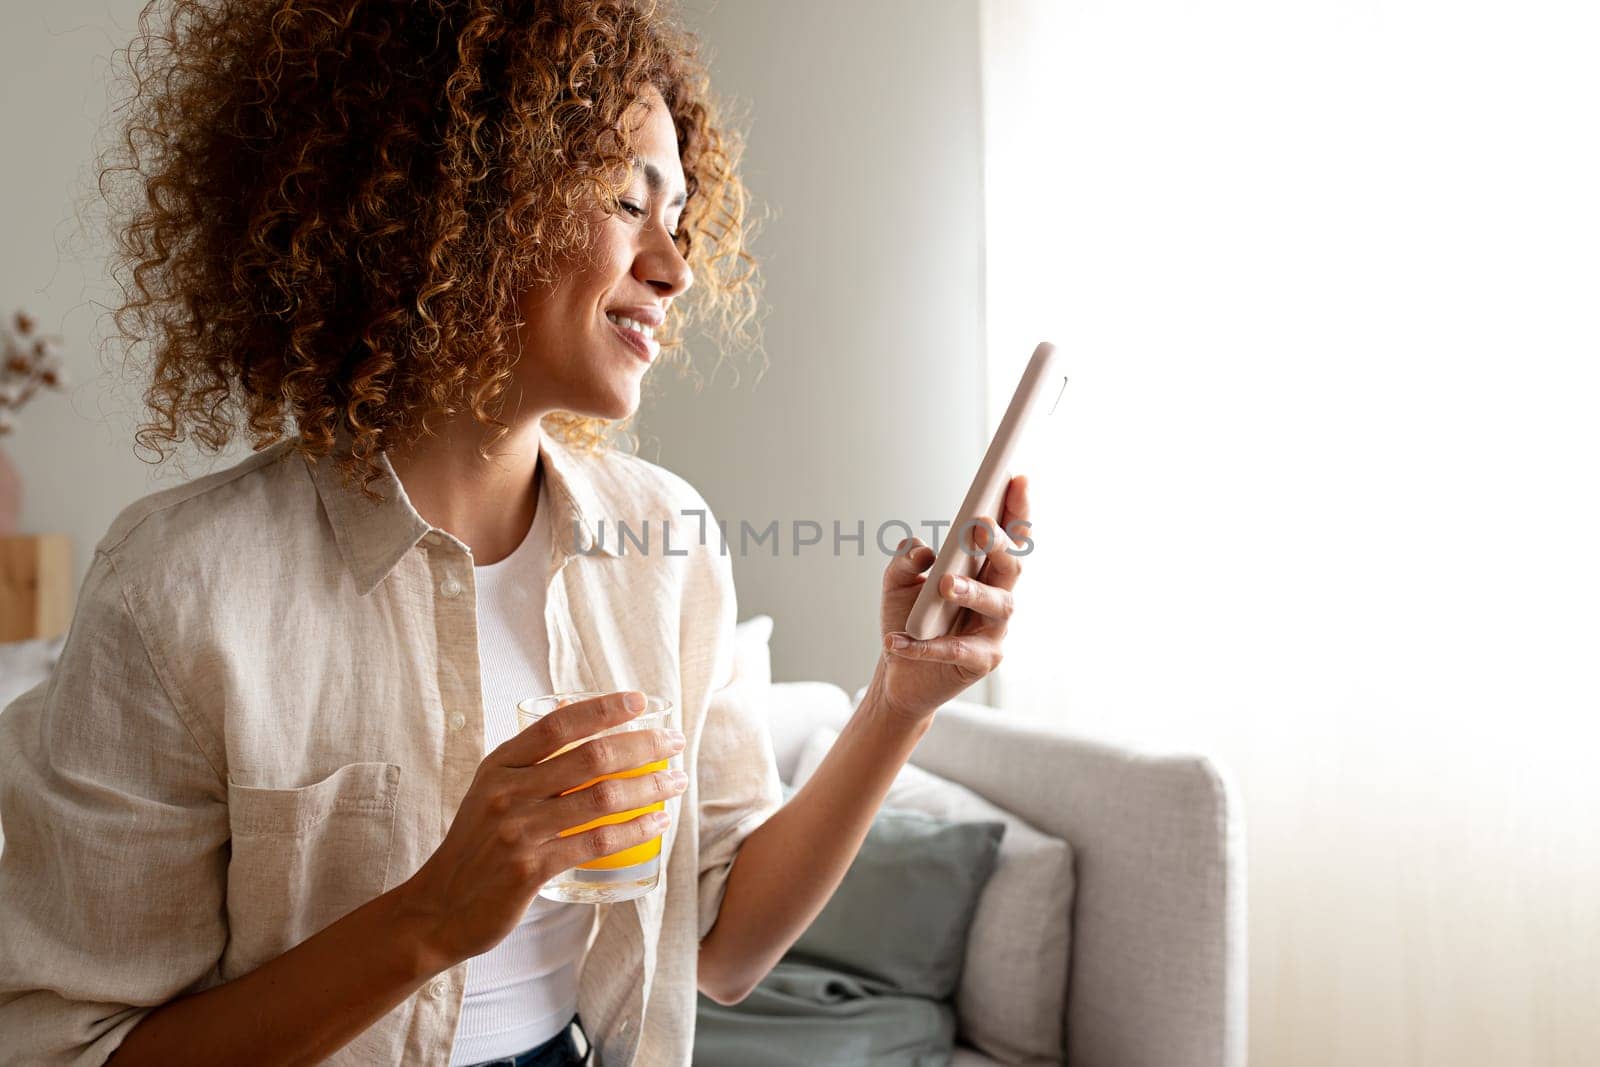 Happy woman using smart phone while drinking orange juice sitting on the couch at home cozy living room. Copy space. Lifestyle and technology concept.